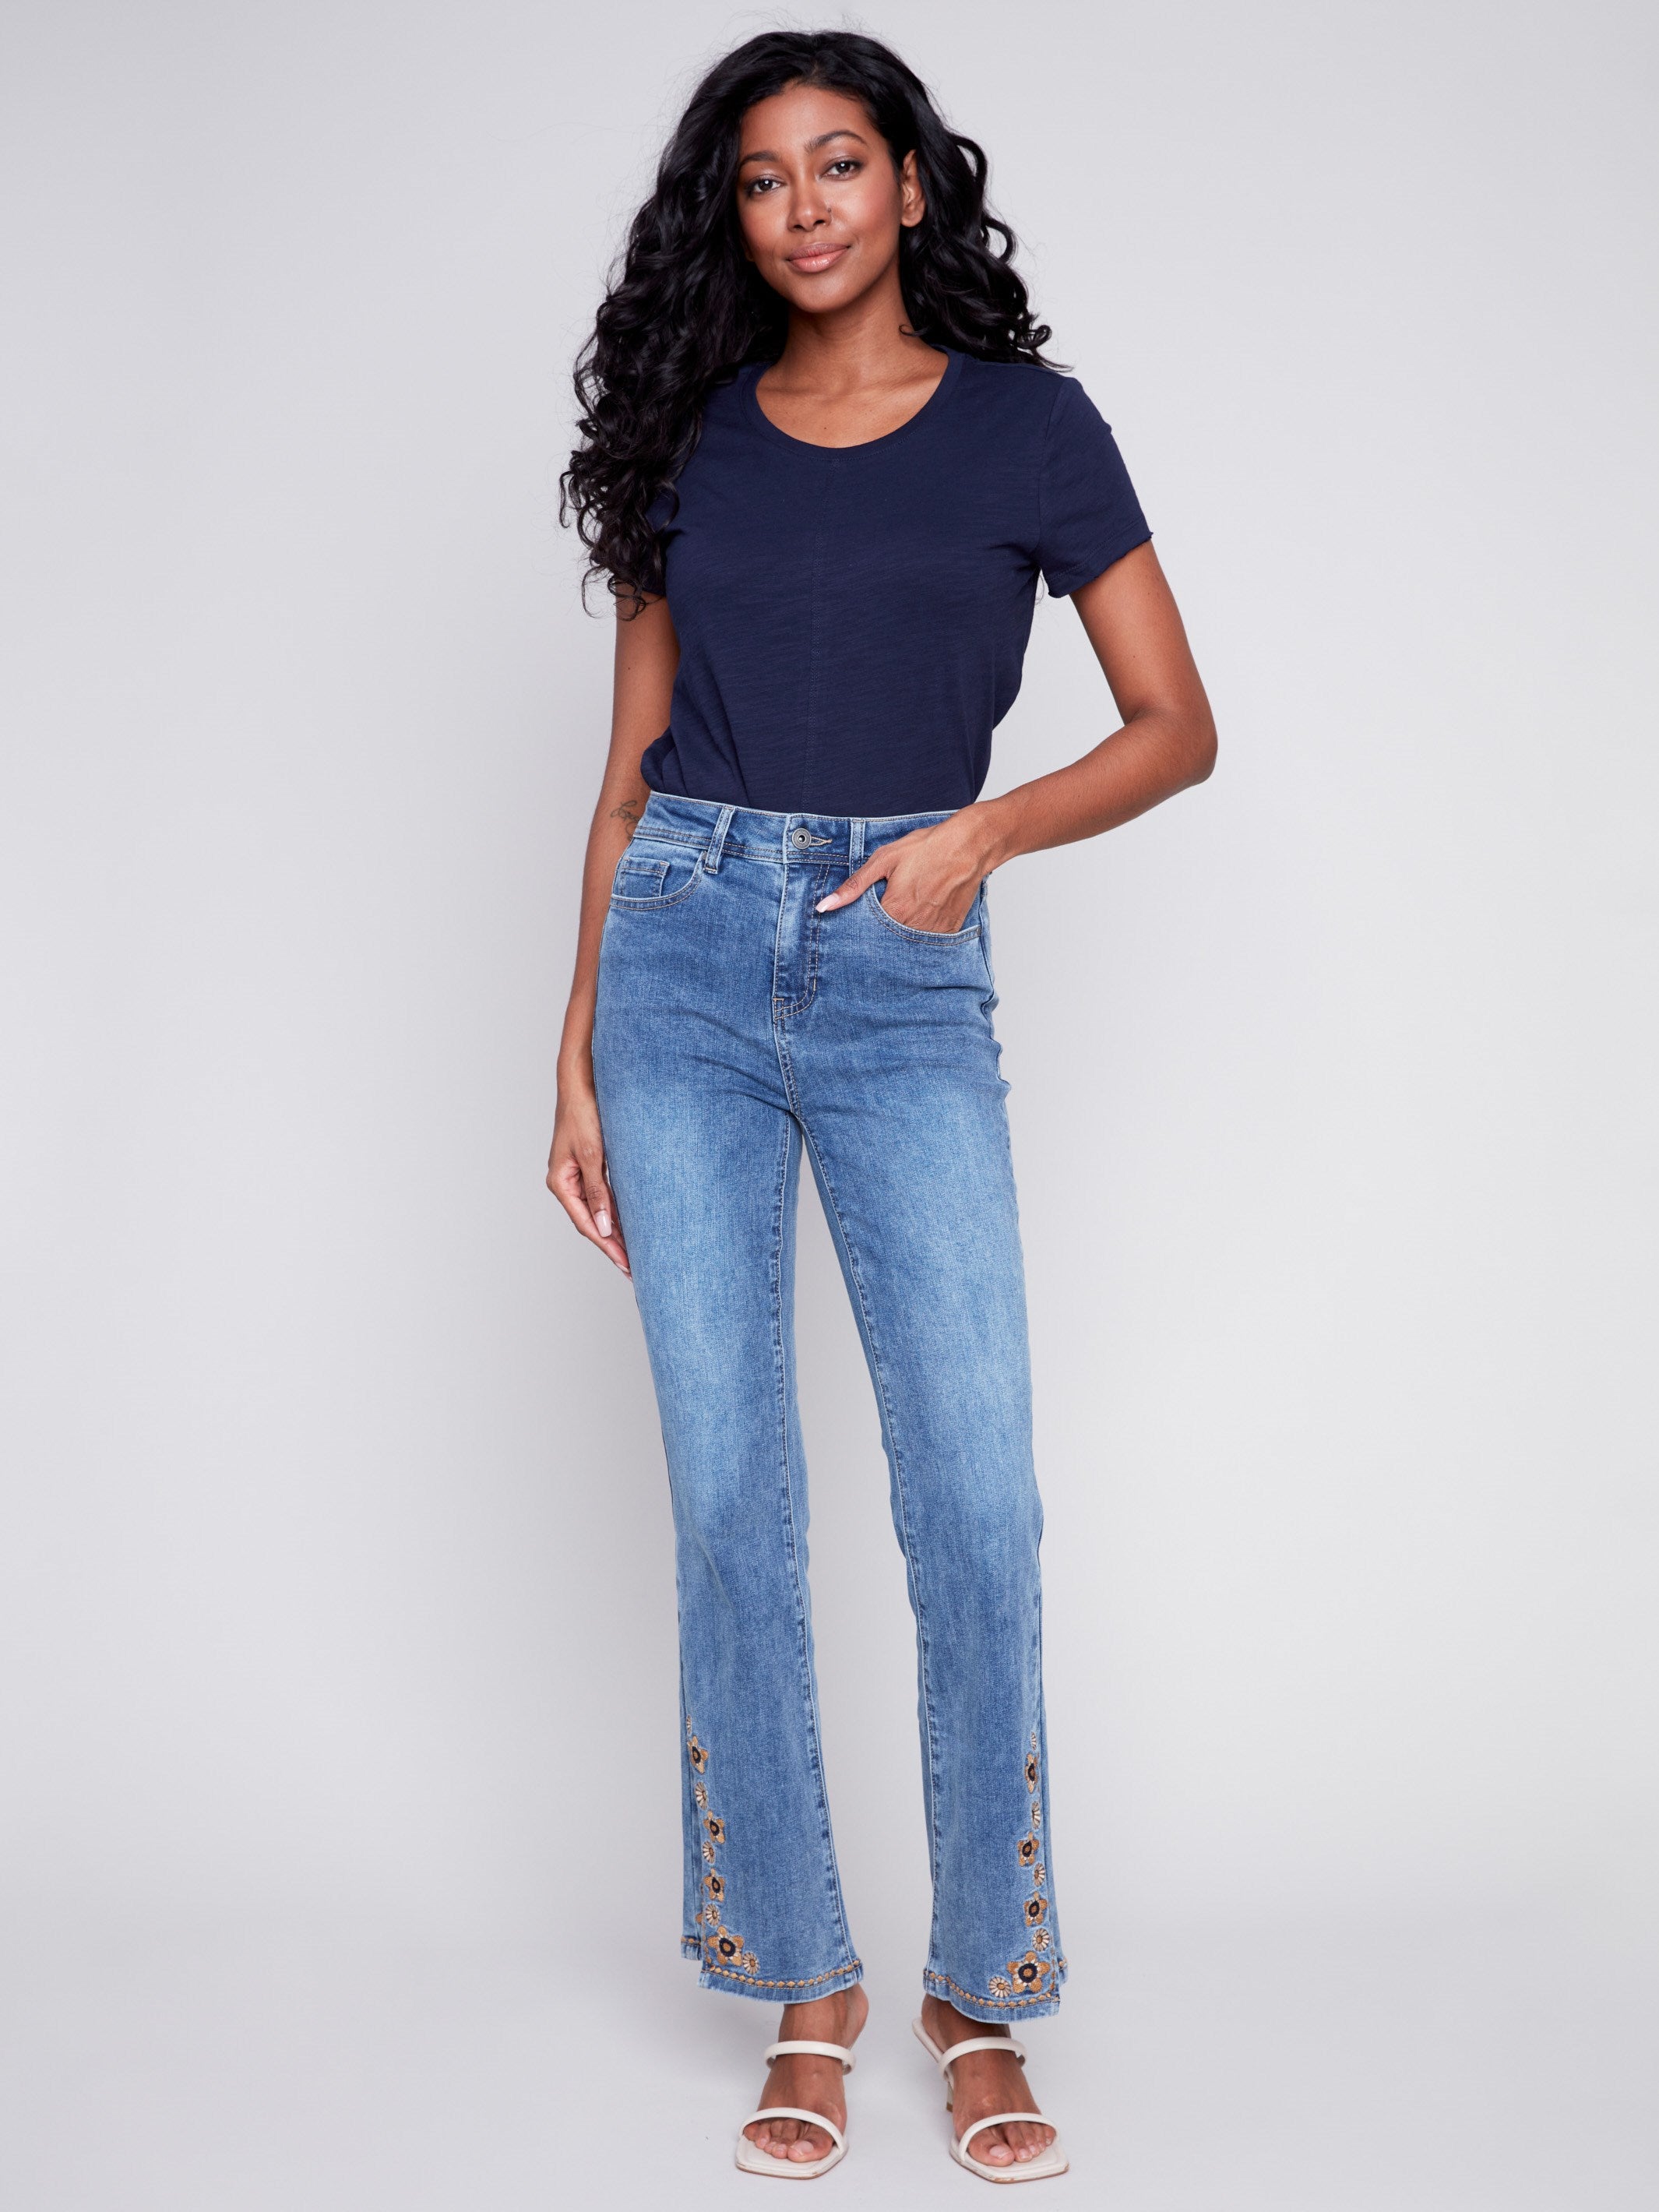 Charlie B Embroidered Bootcut Jeans with Front Slits - Medium Blue - Image 1